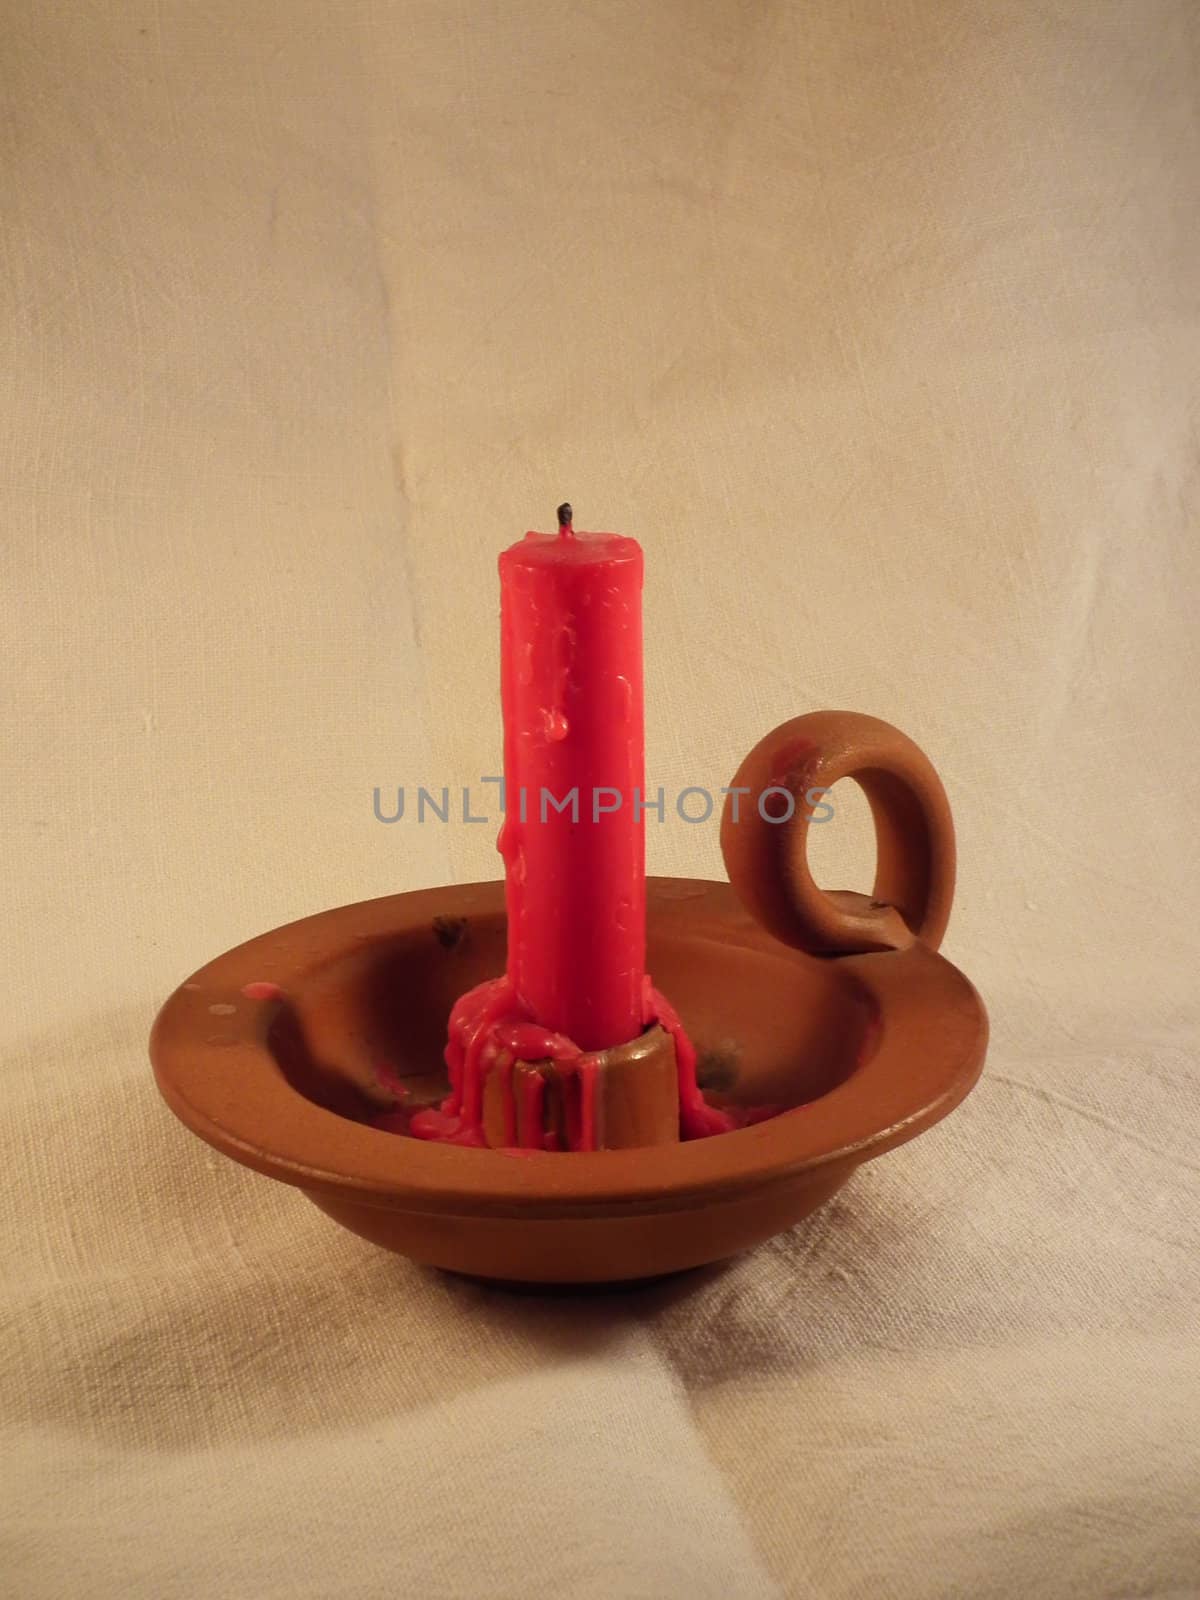 Red candel batura and old light